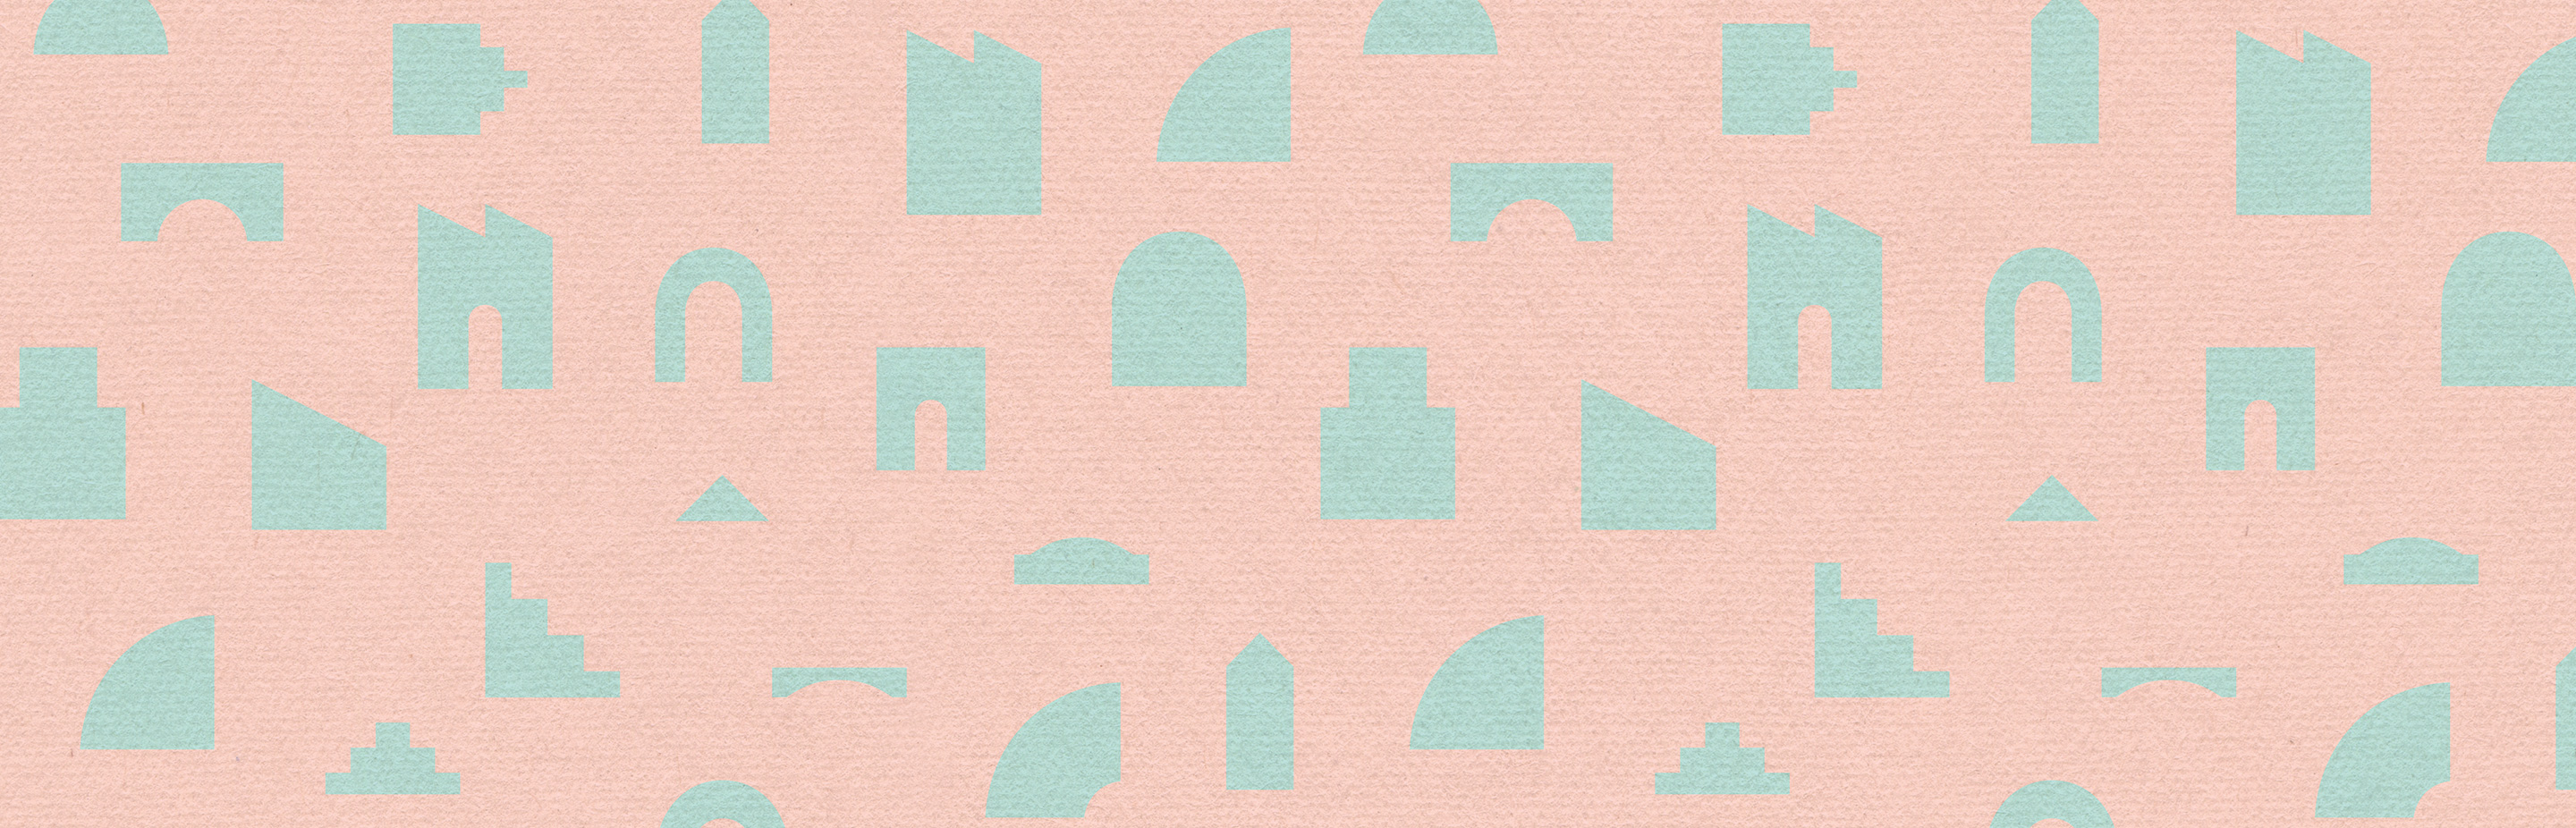 Light pink background with textured light green geometric shape